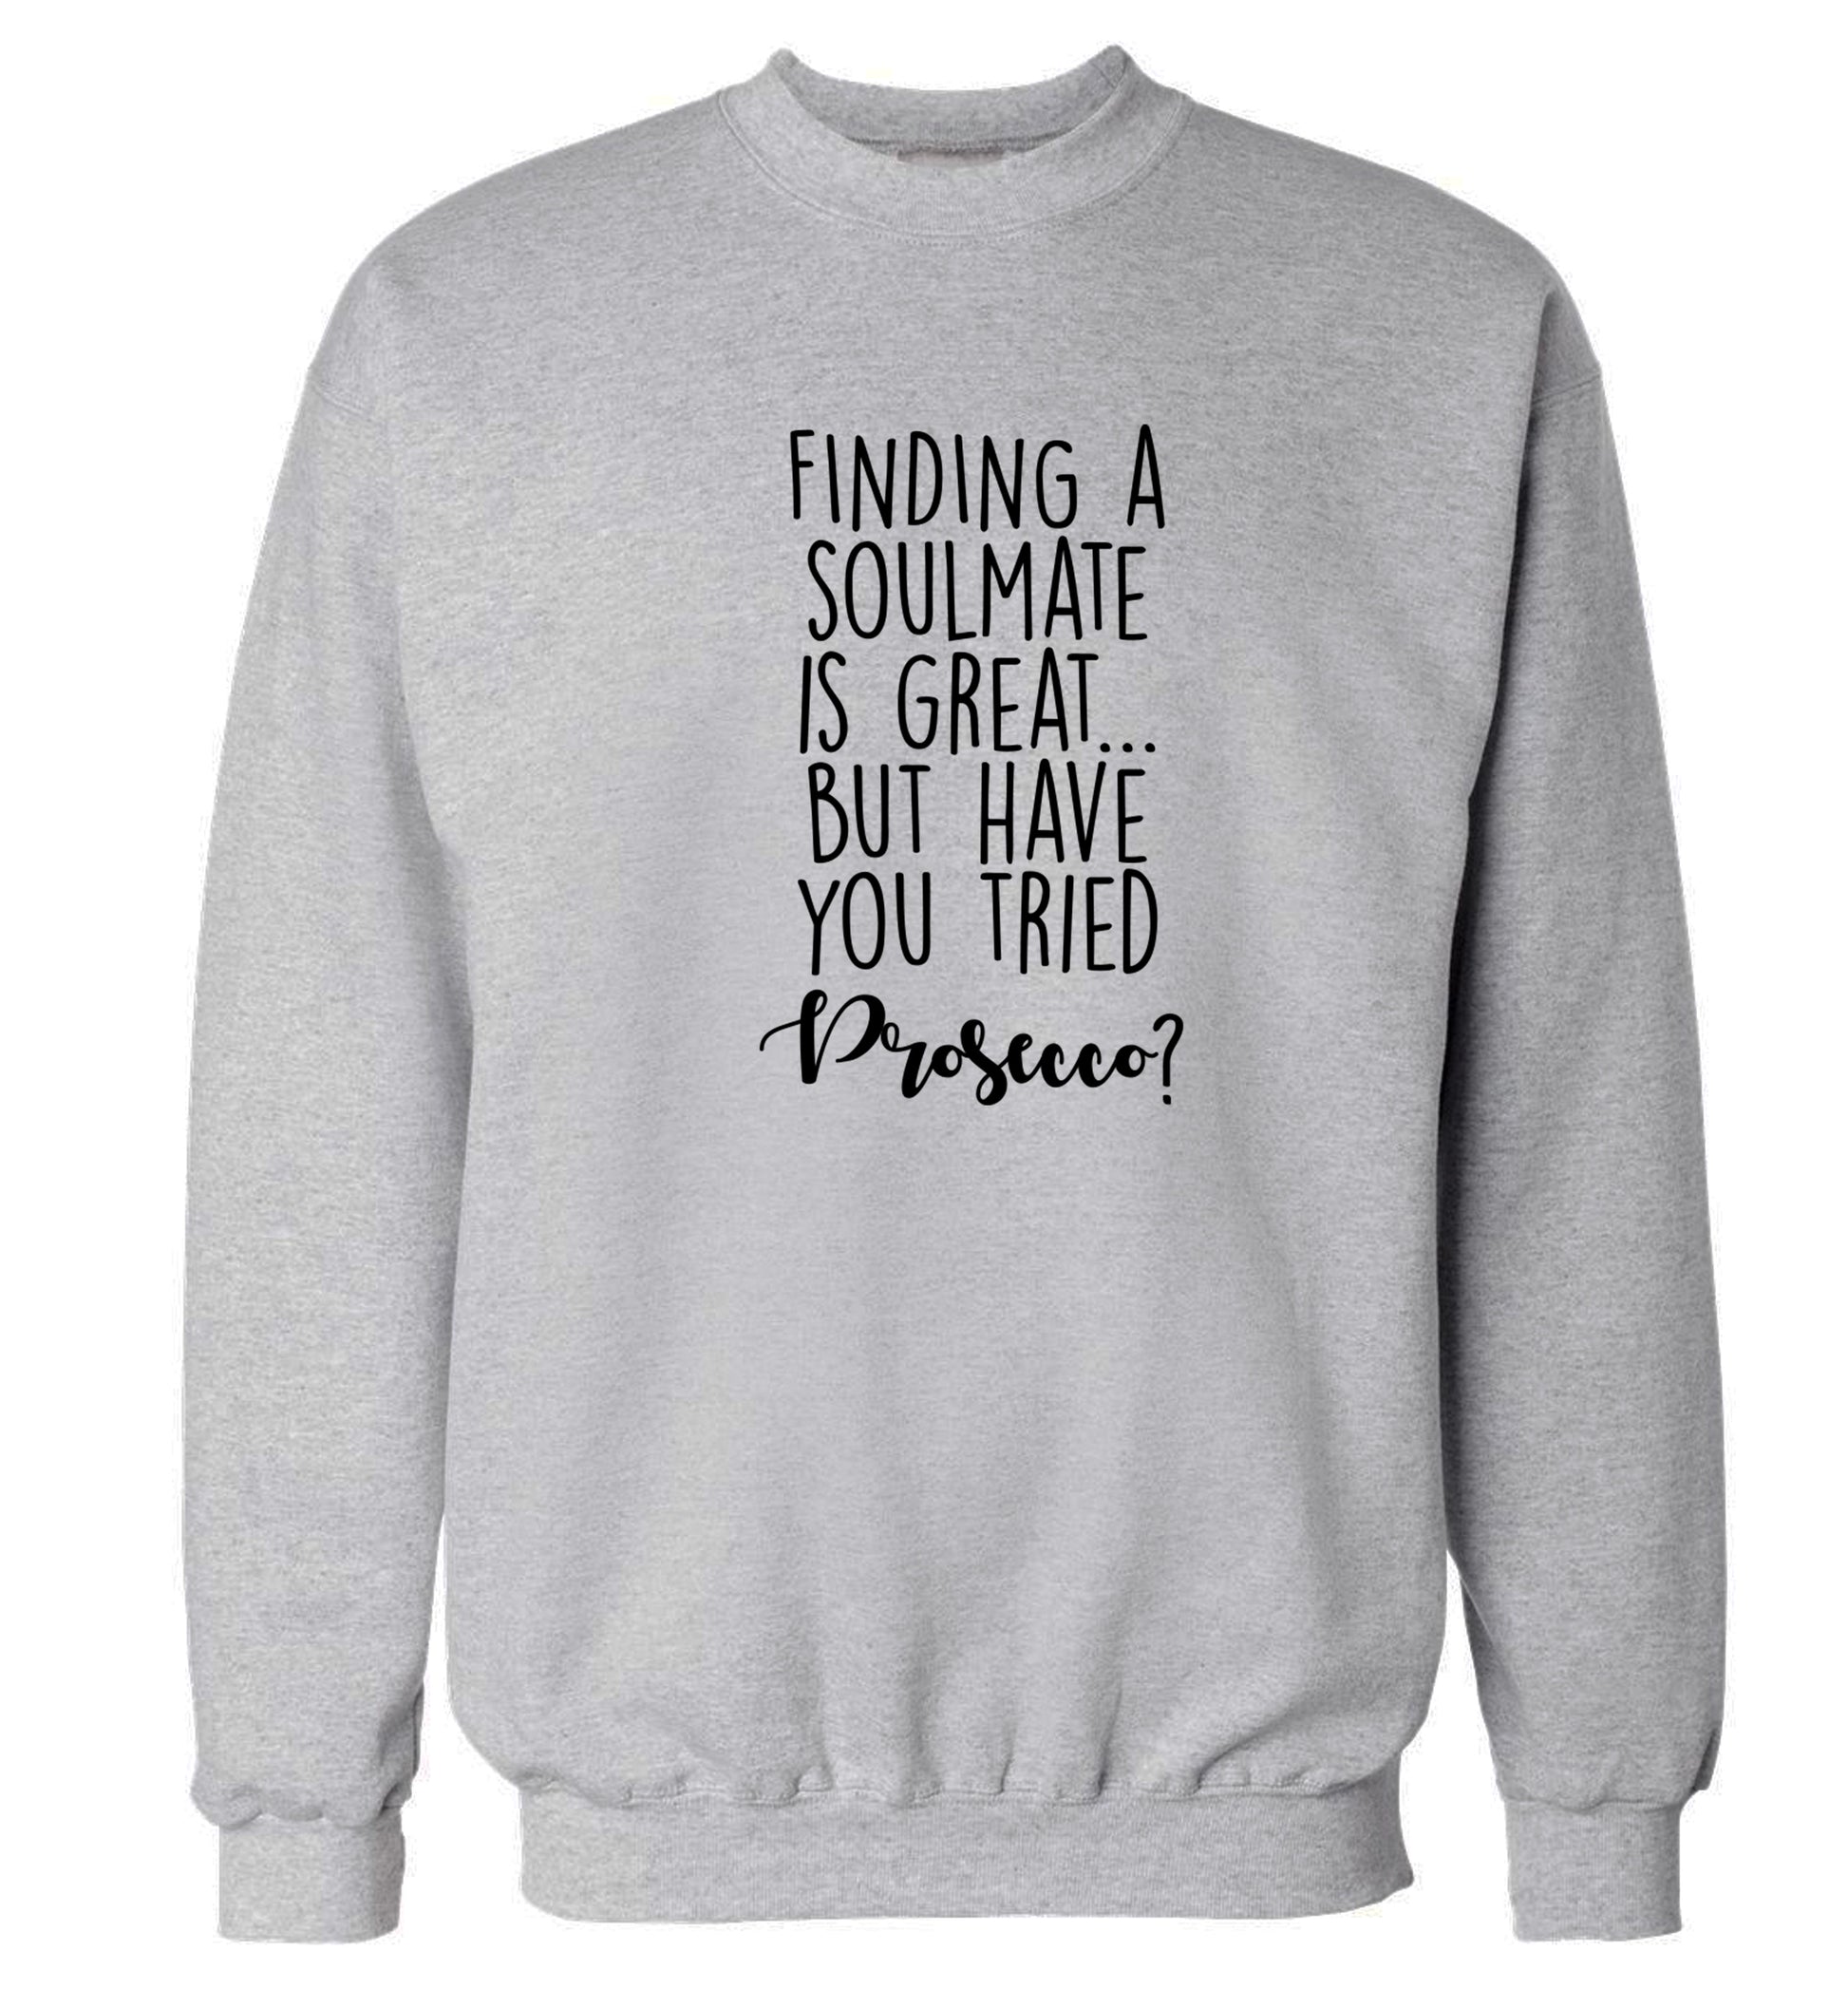 Finding a soulmate is great but have you tried prosecco? Adult's unisex grey Sweater 2XL